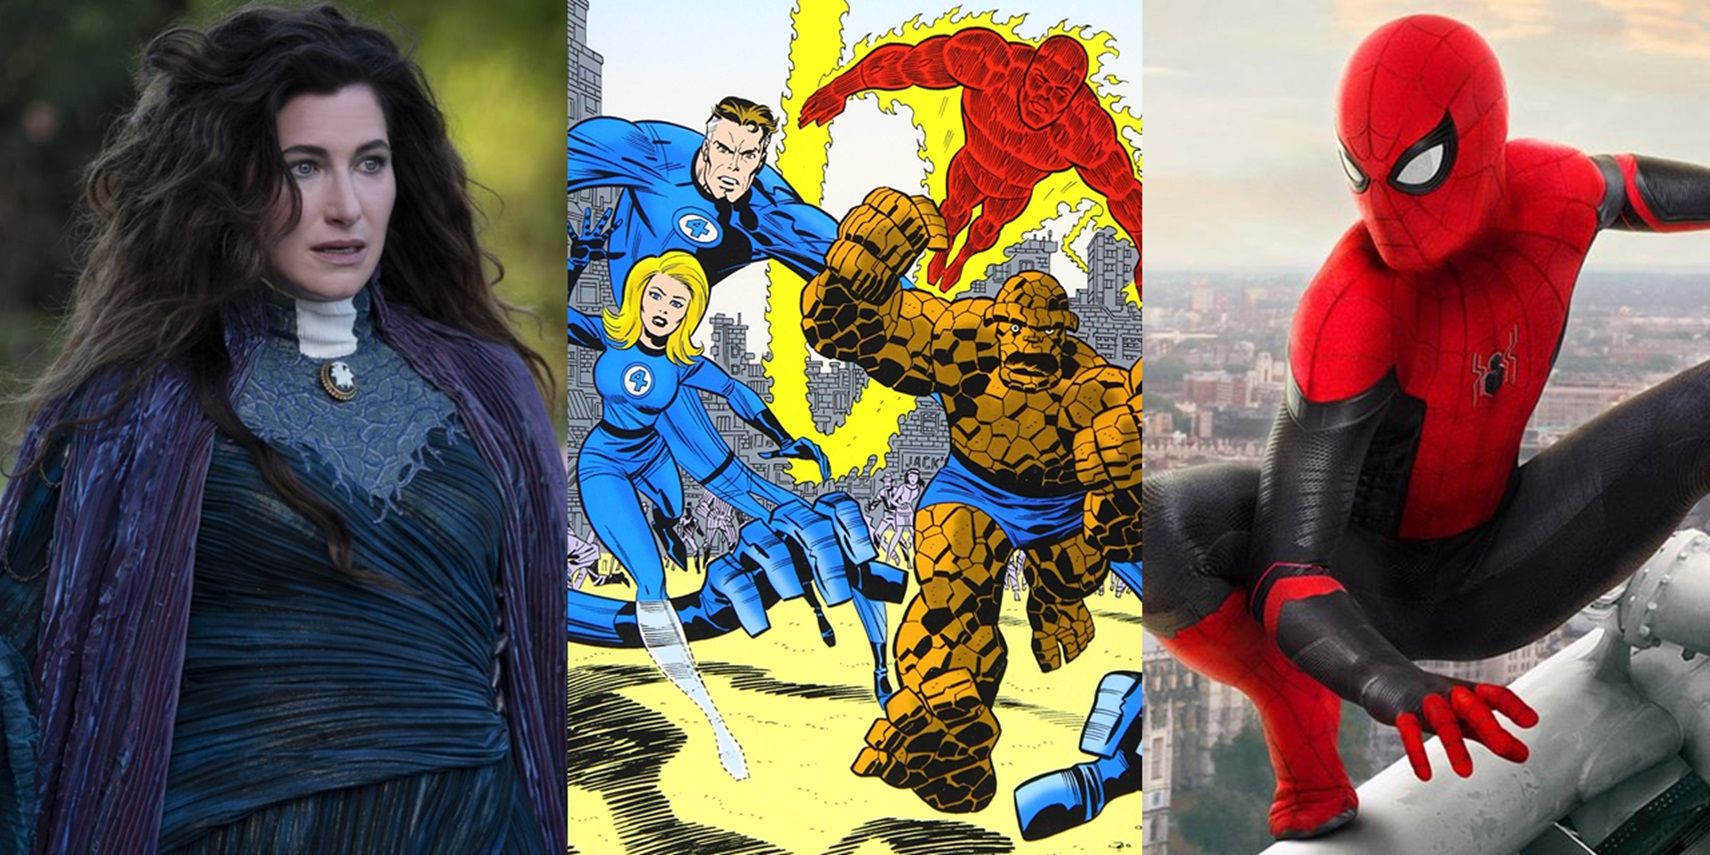 Fantastic Four MCU team-ups with Agatha Harkness and Spider-Man